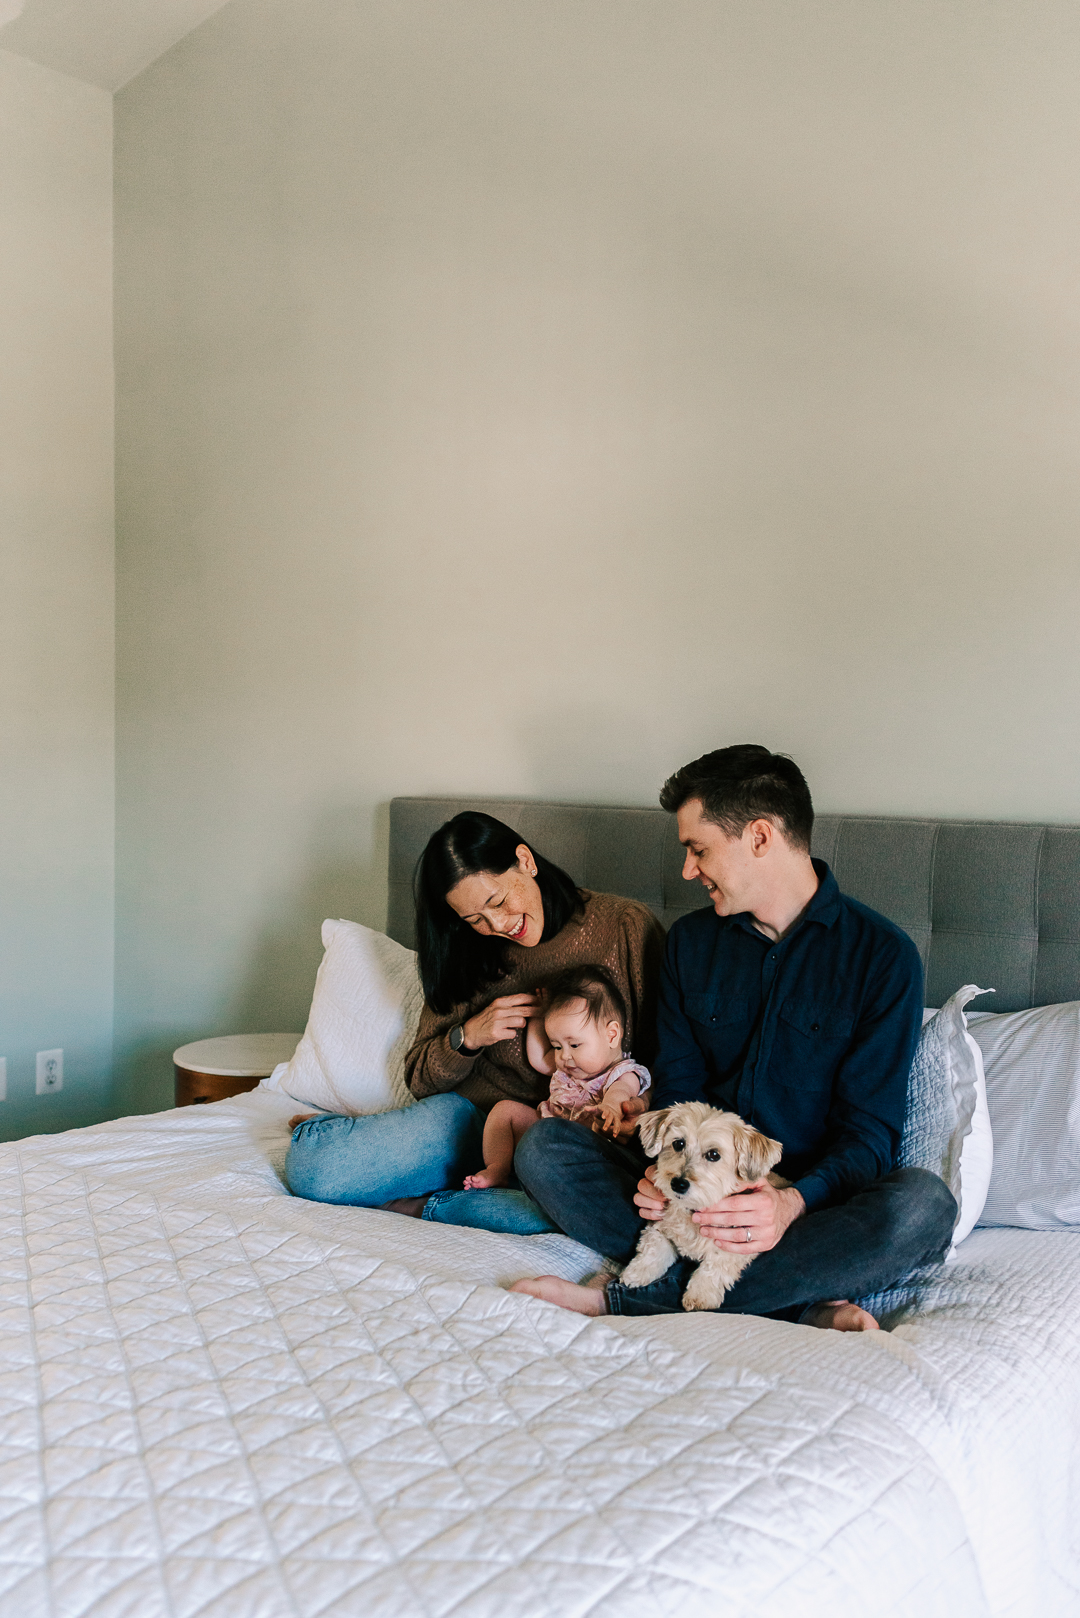 A mom and dad play with their infant daughter and small dog on a bed after having a fairfax home birth